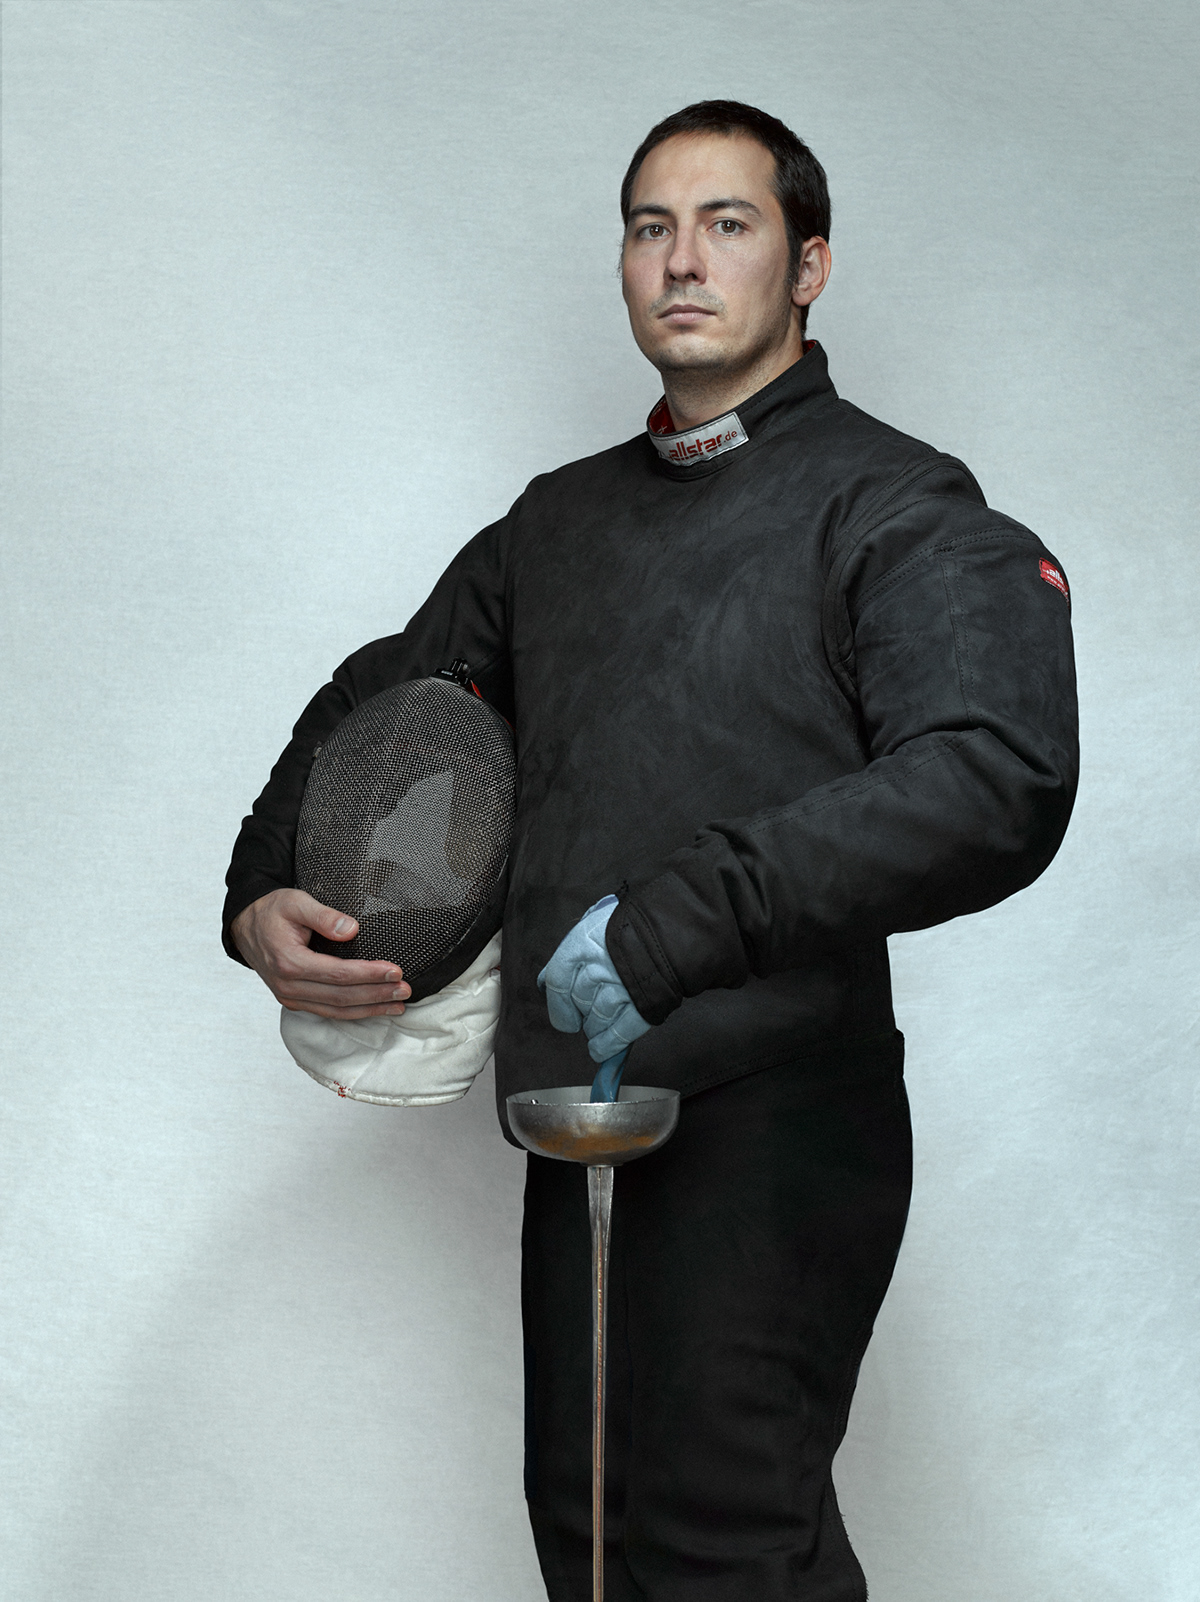 fencing Photography  fencer photoserie action sport olympic